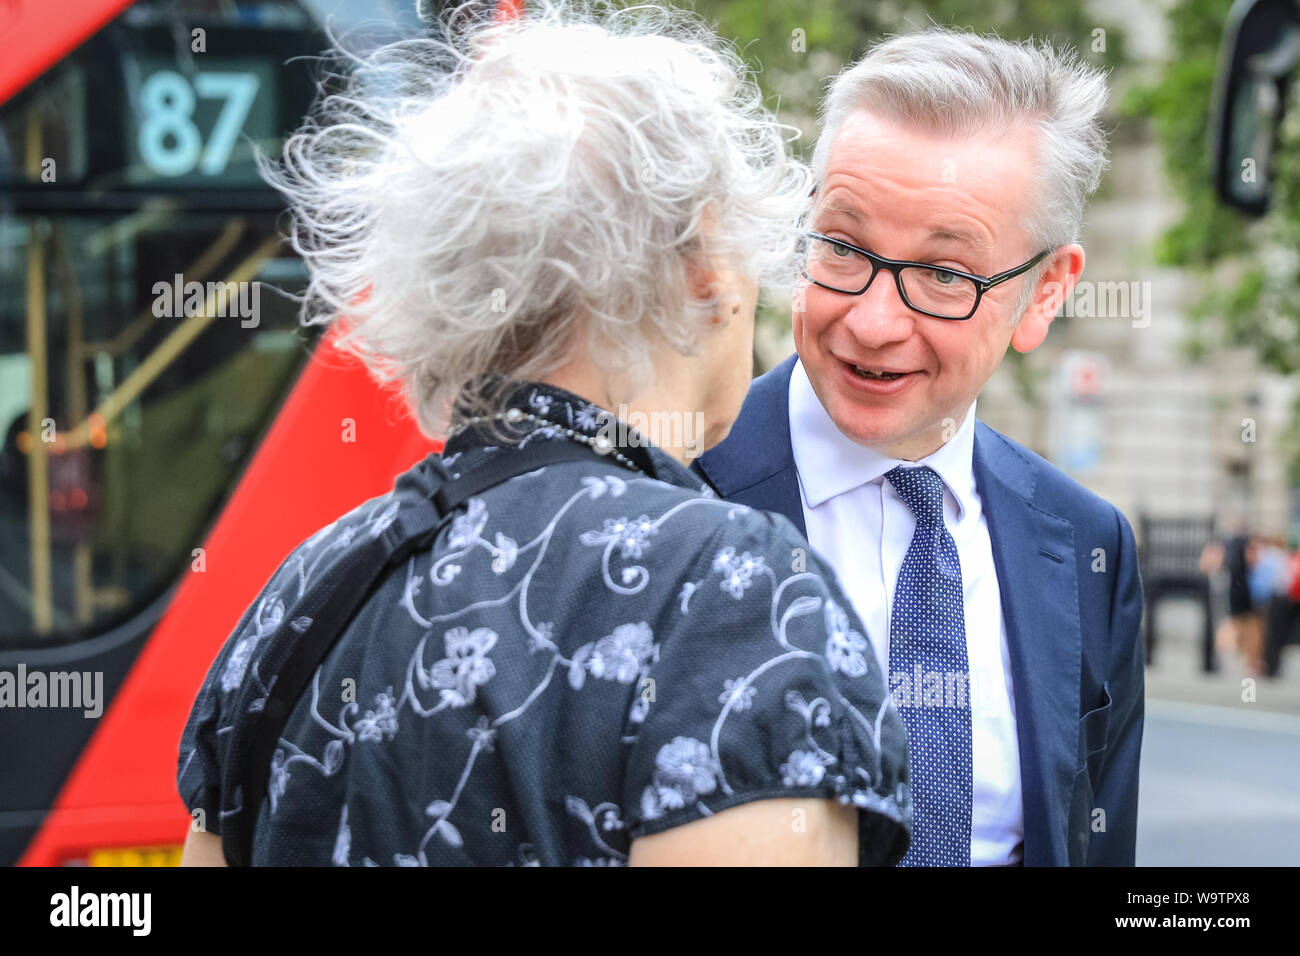 London, UK. 15th Aug, 2019.  Michael Gove, Chancellor of the Duchy of Lancaster with responsibility for no-deal Brexit preparations, as well as overseeing constitutional affairs, maintaining the integrity of the Union and having oversight over all Cabinet Office policy, exits the Cabinet Office in Whitehall and chats to a woman. Credit: Imageplotter/Alamy Live News Stock Photo